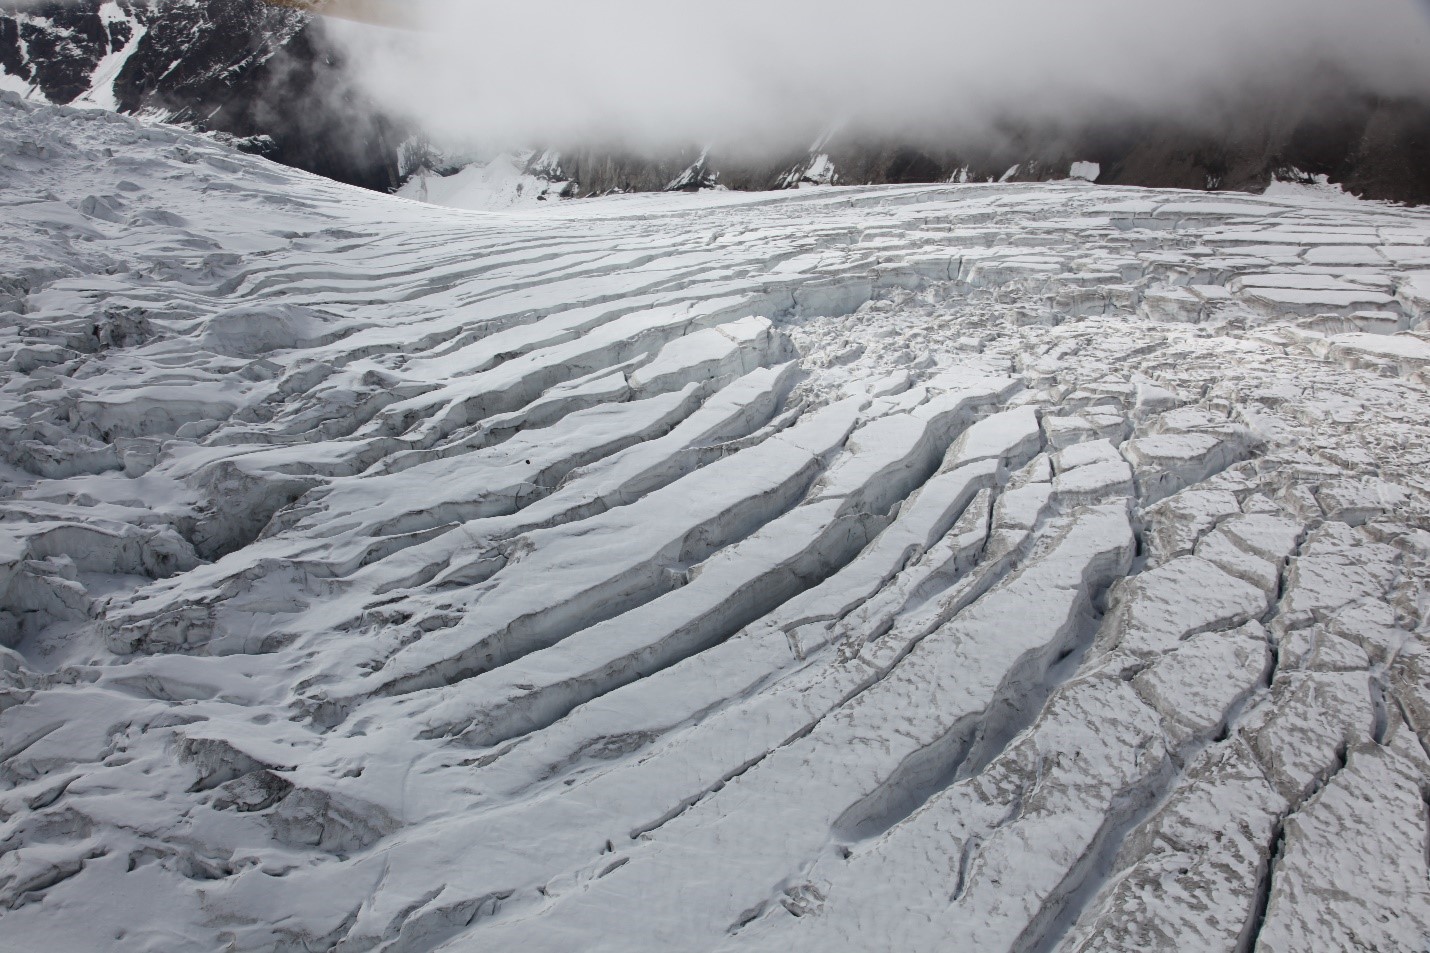 Deep crevasses every few yards slice up a glacier surface